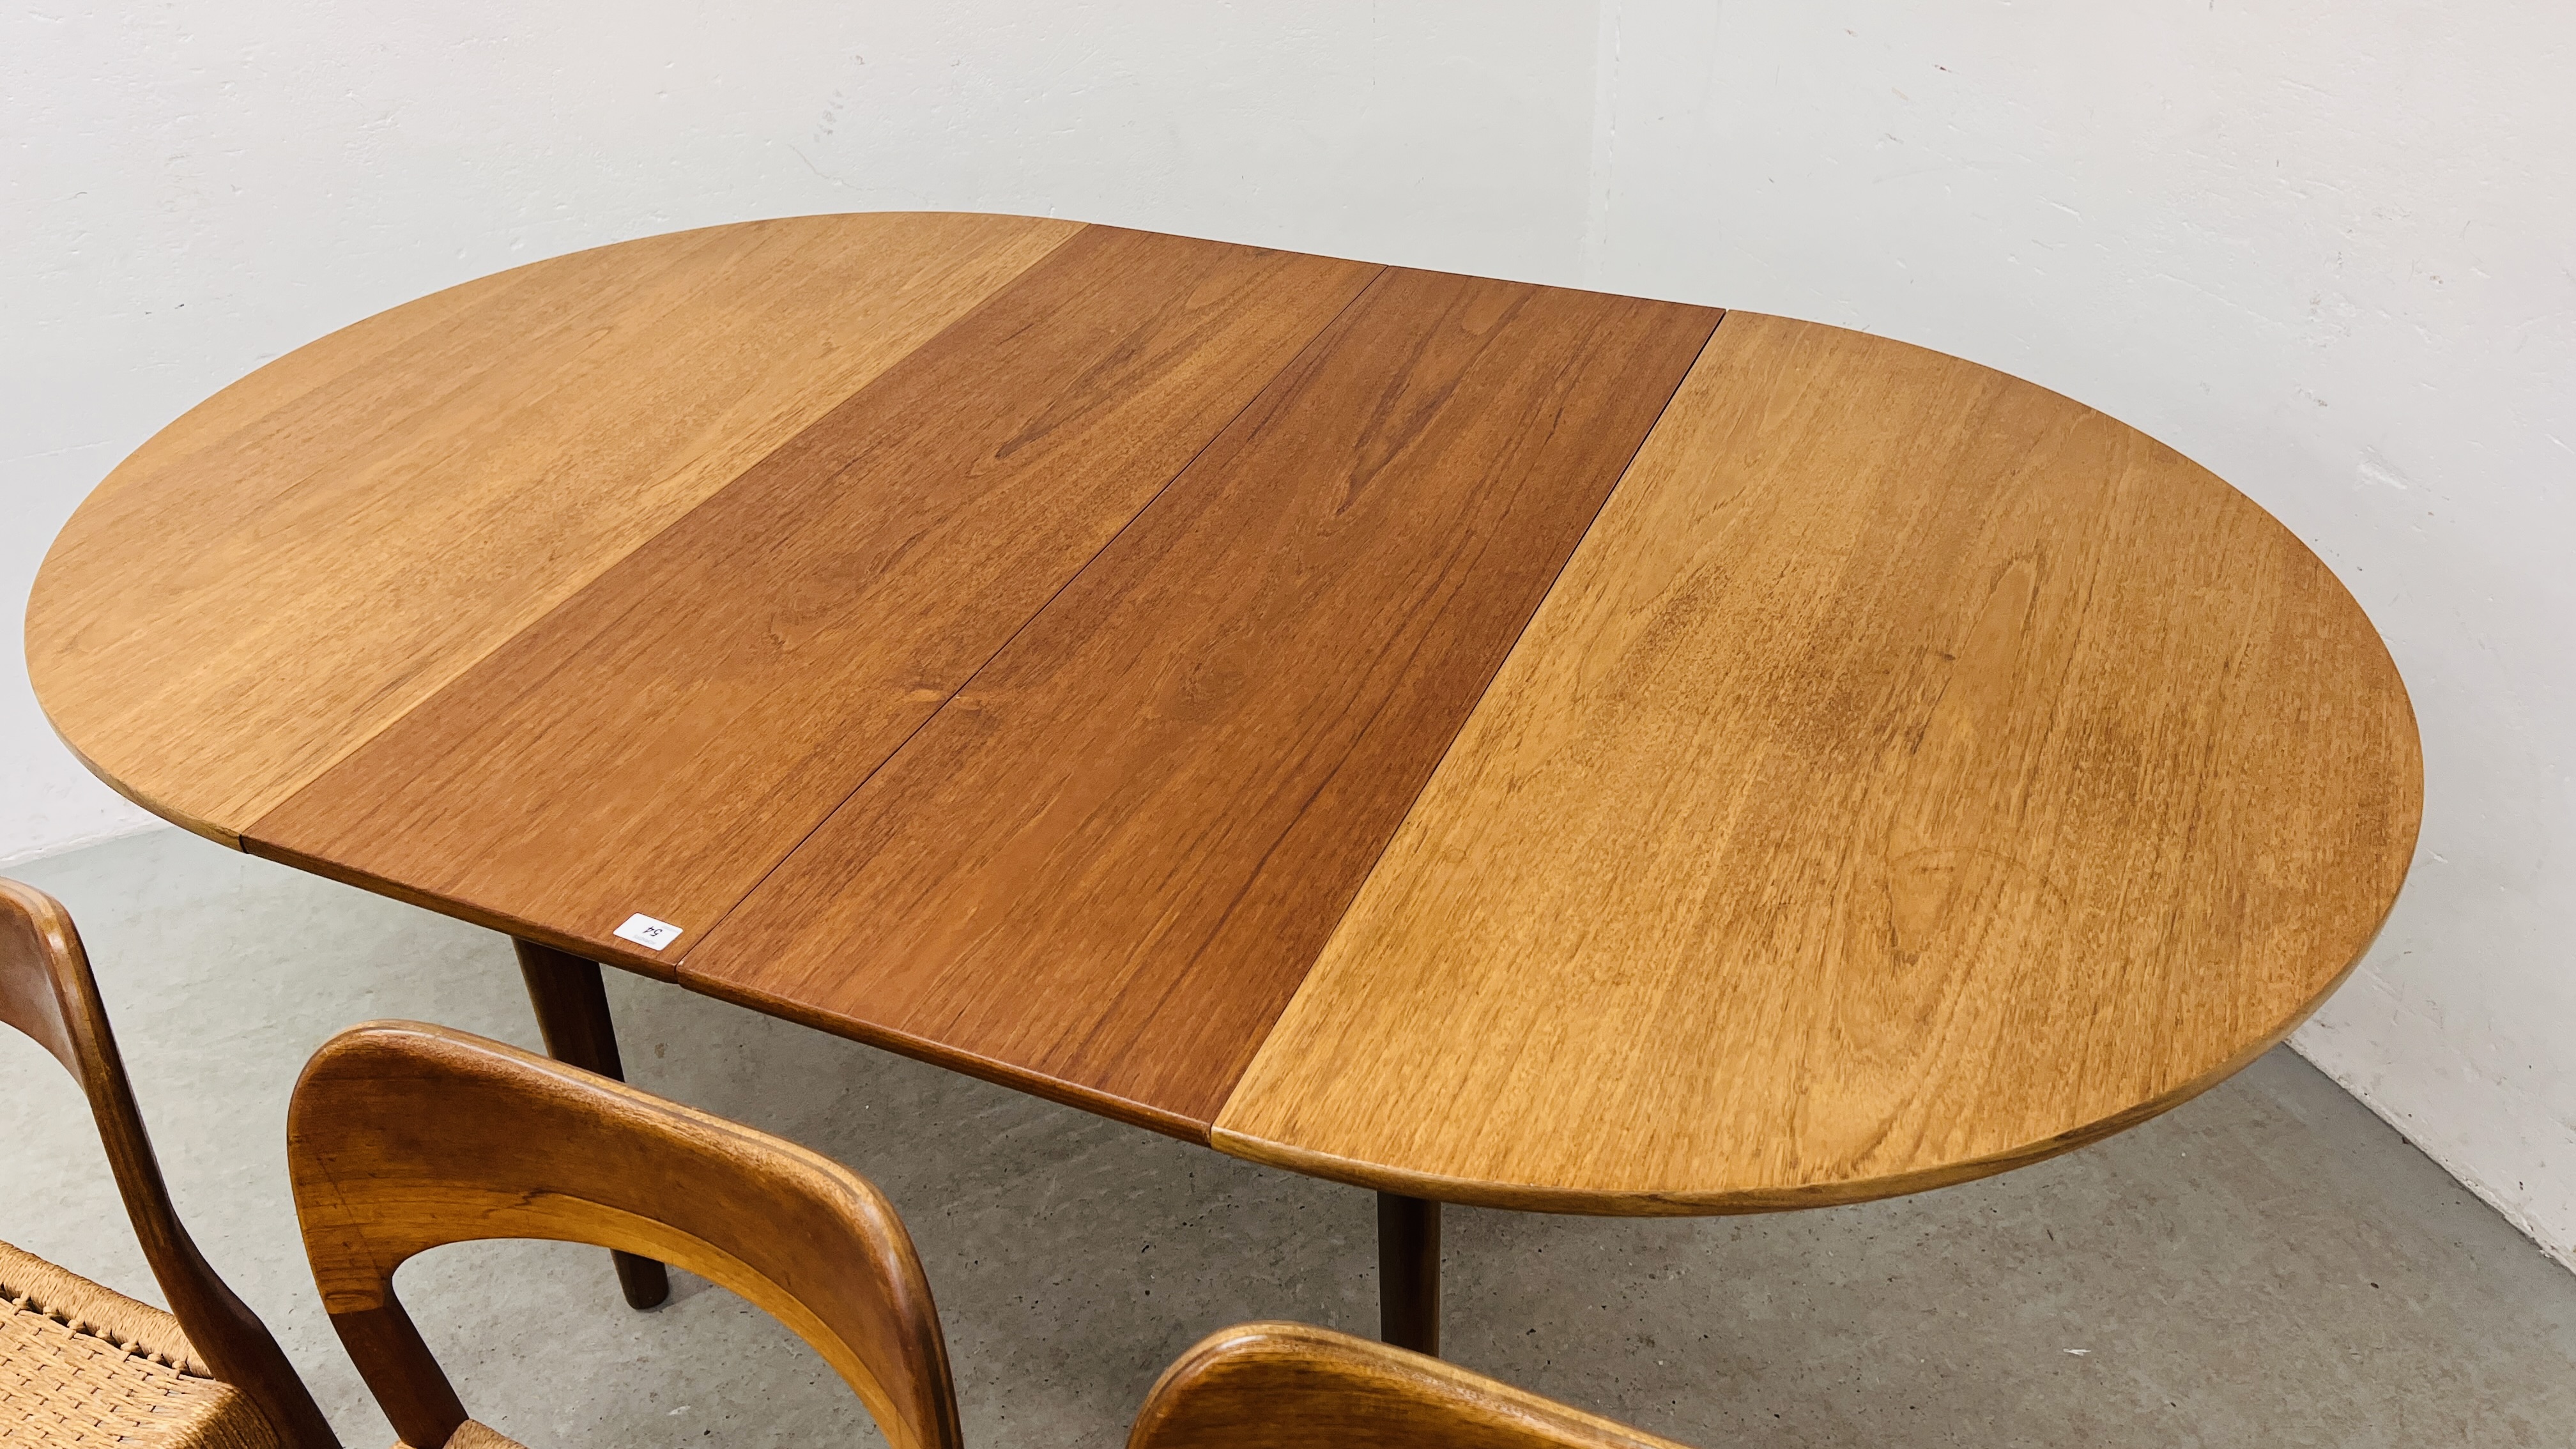 DANISH MID-CENTURY TEAK EXTENDING CIRCULAR DINING TABLE (2 LEAVES) ALONG WITH A SET OF SIX DANISH - Image 17 of 23